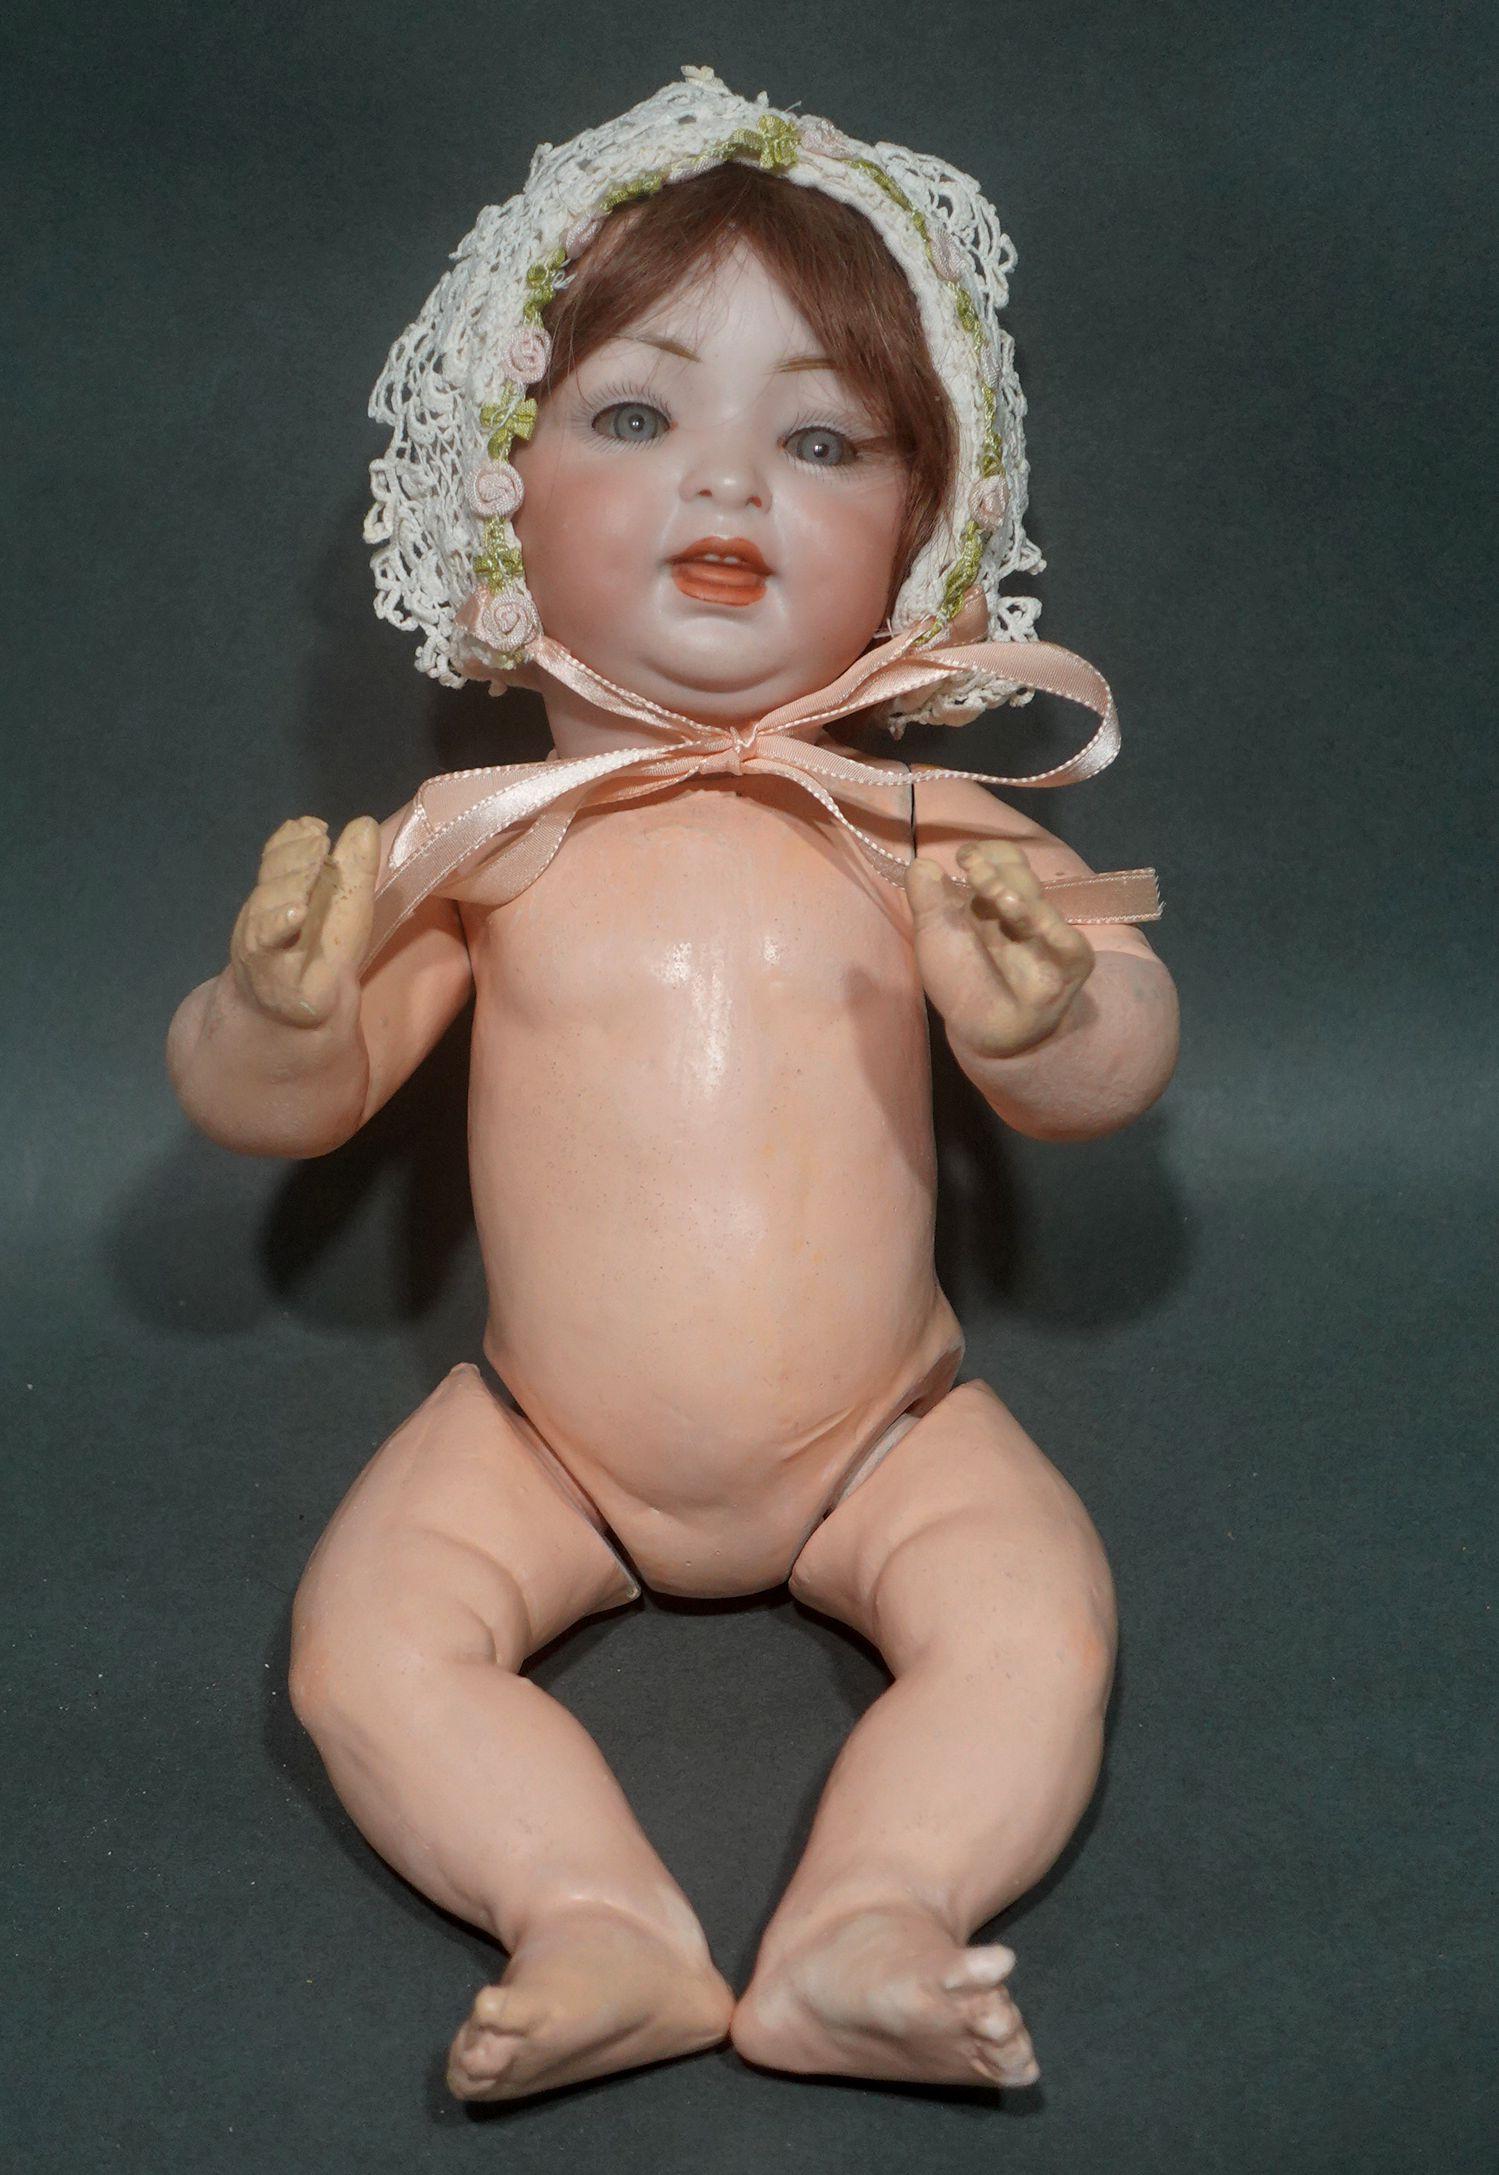 Antique German Bisque Doll #152/4 Happy Character Baby by Hertel Schwab Ric#005 For Sale 2